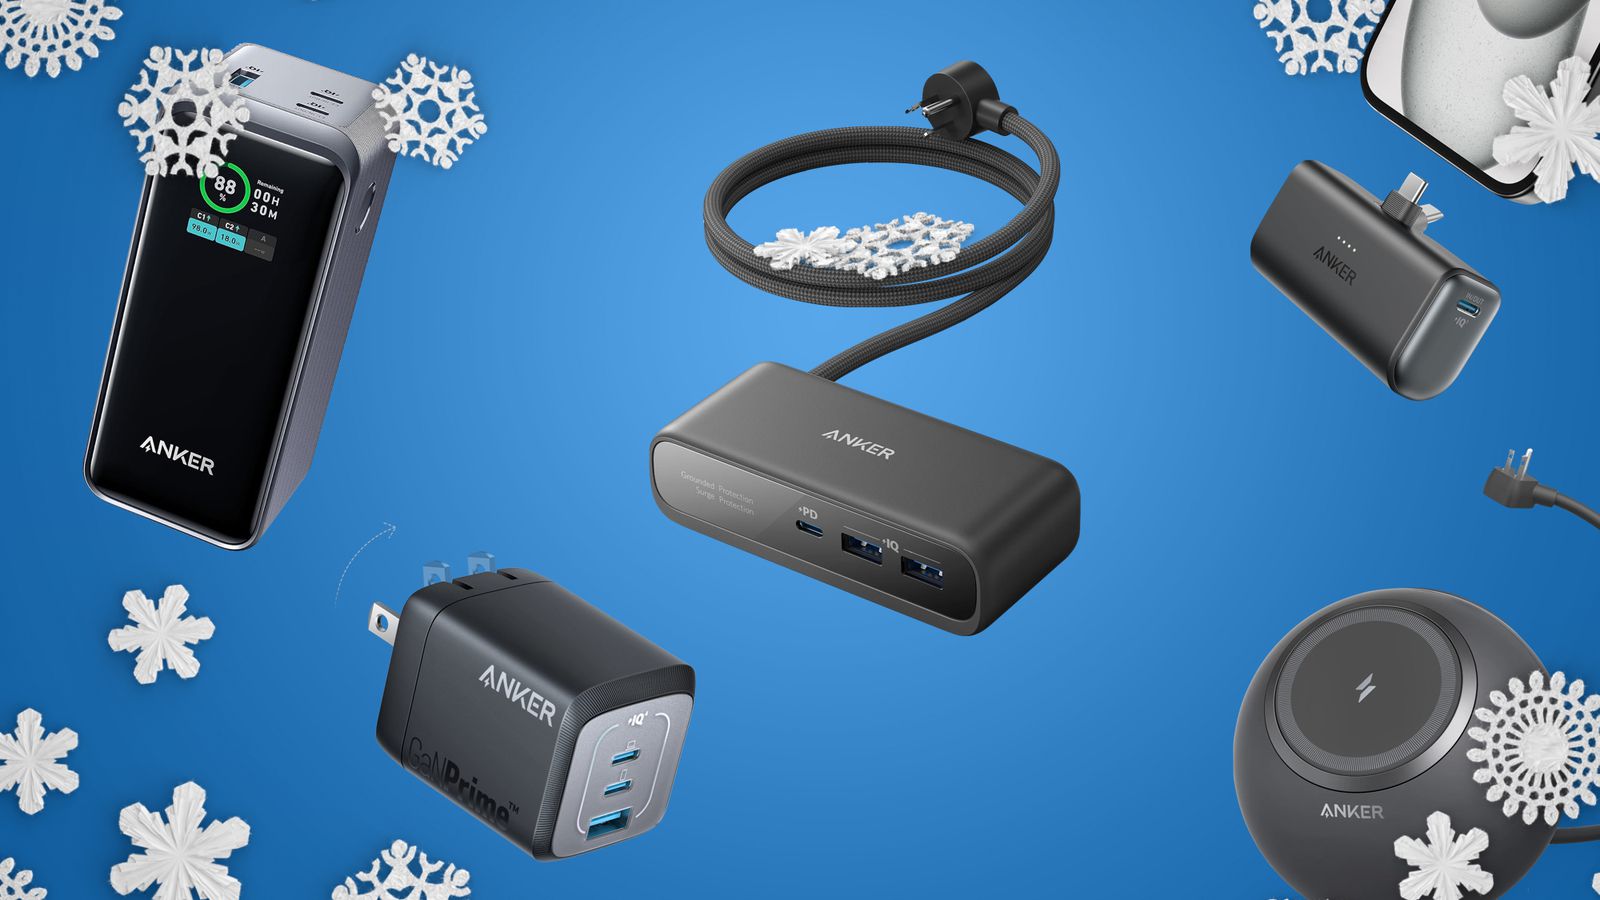 This Anker Prime Black Friday sale makes Prime Day look like a joke